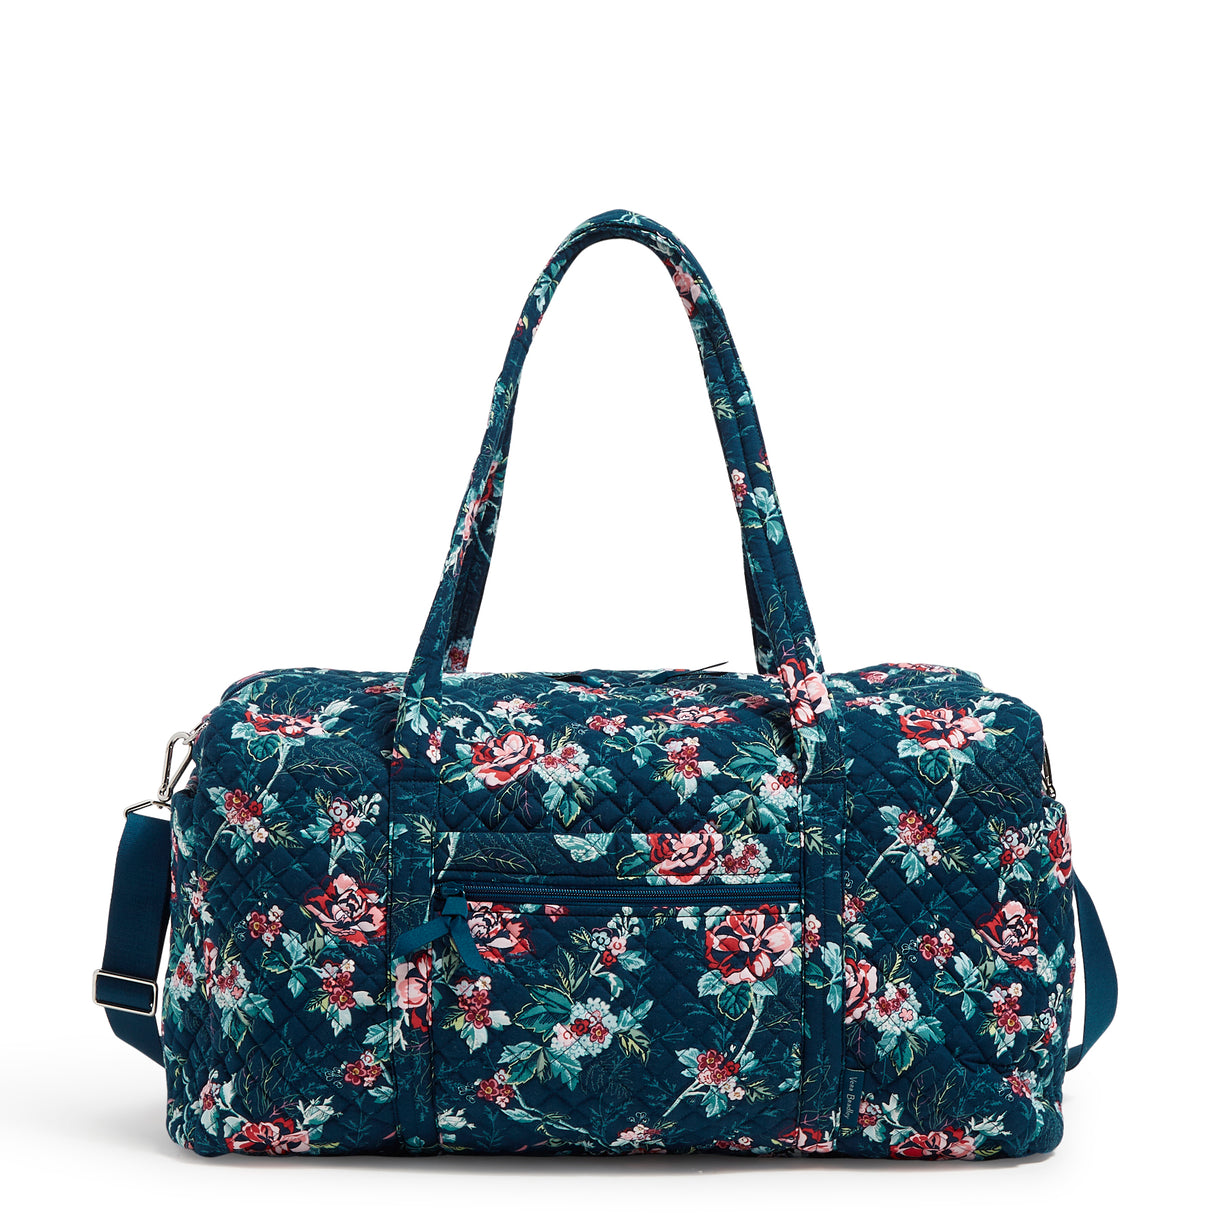 Vera Bradley Large Duffel Bag - Rose Toile – Occasionally Yours